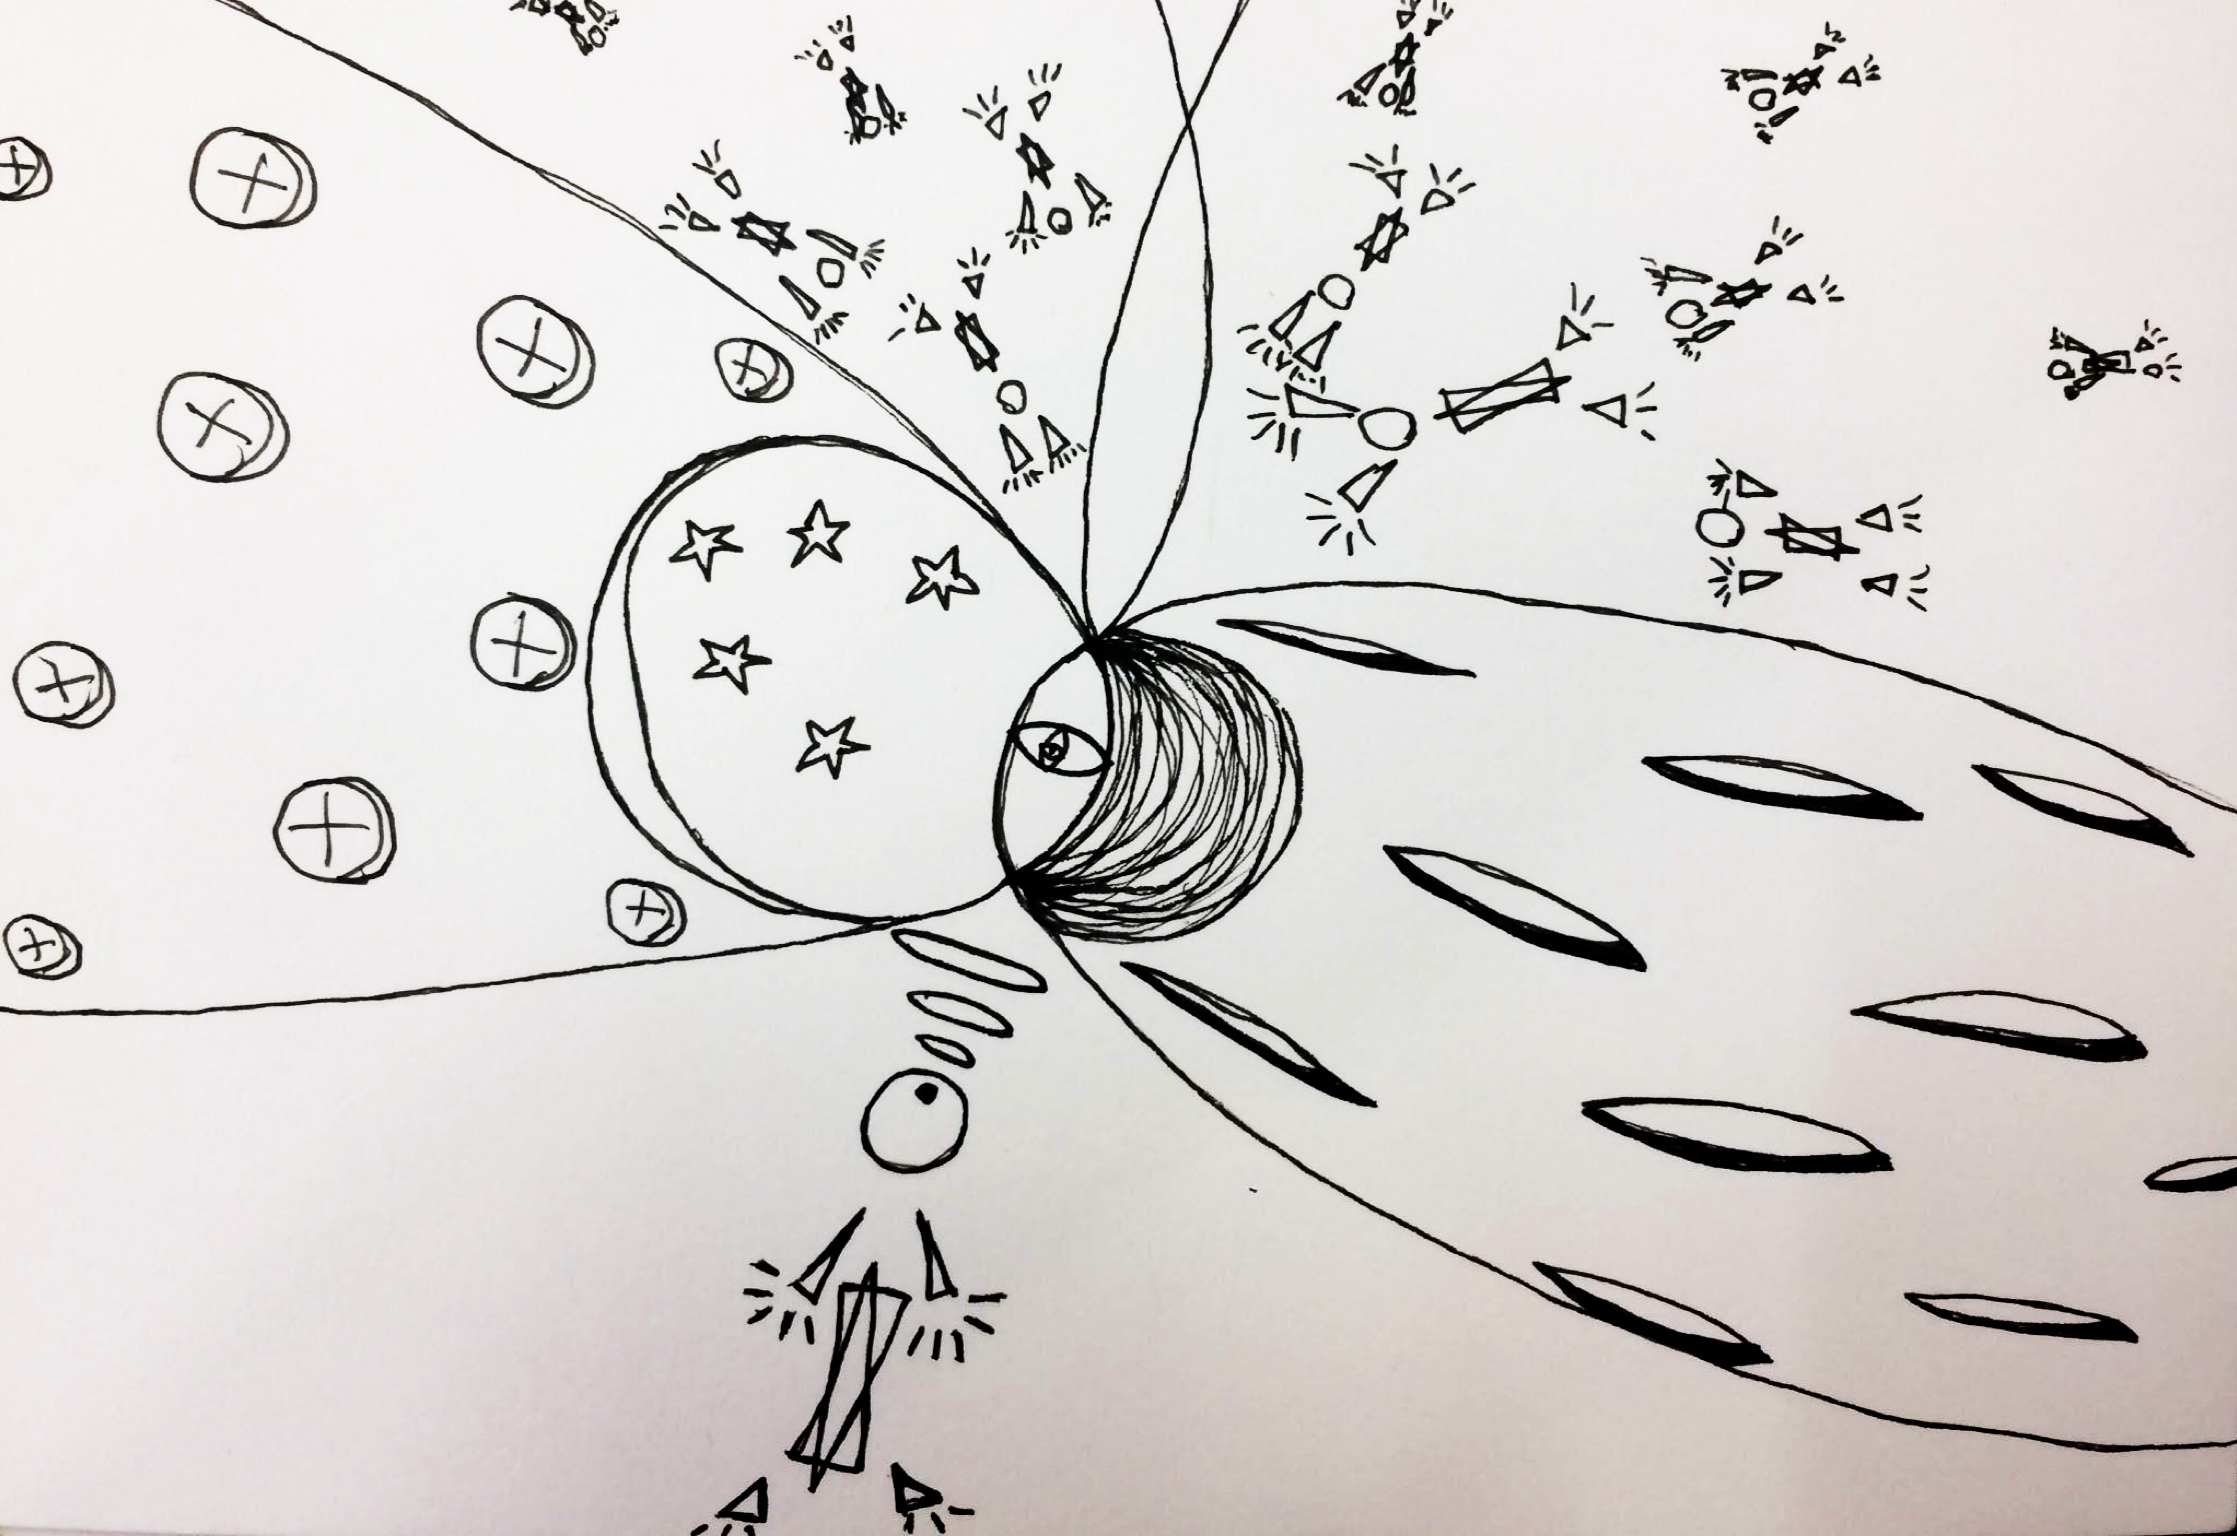 solar eclipse portal intuitive drawing with angelic spirits